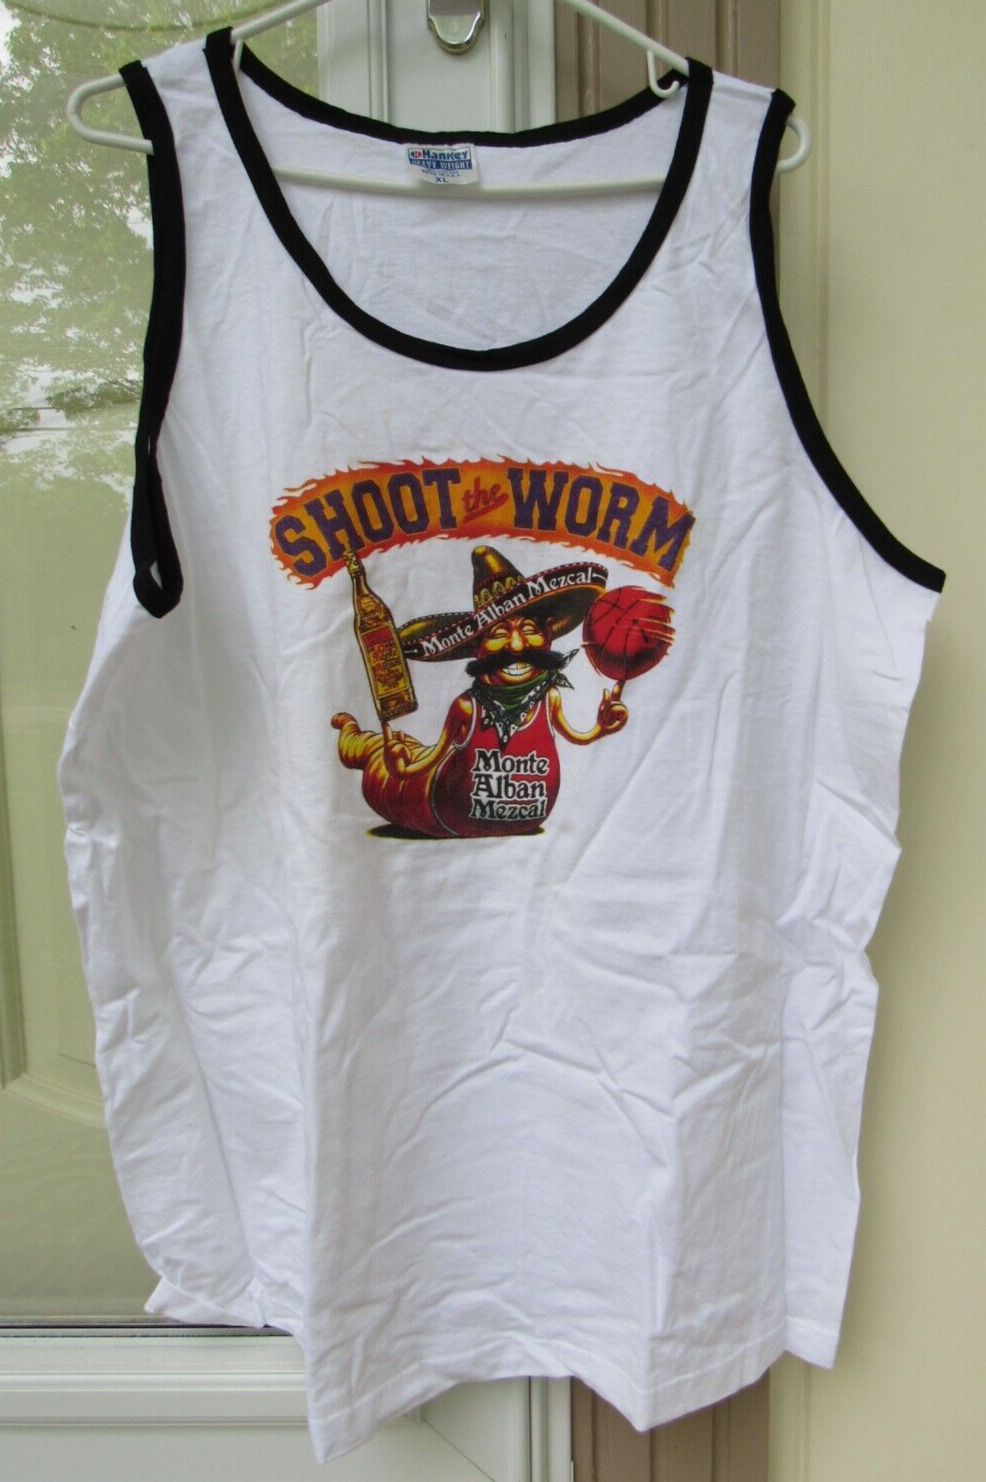 New Monte Alban Mezcal Tequilla SHOOT THE WORM Basketball Tank Top Shirt X-Large